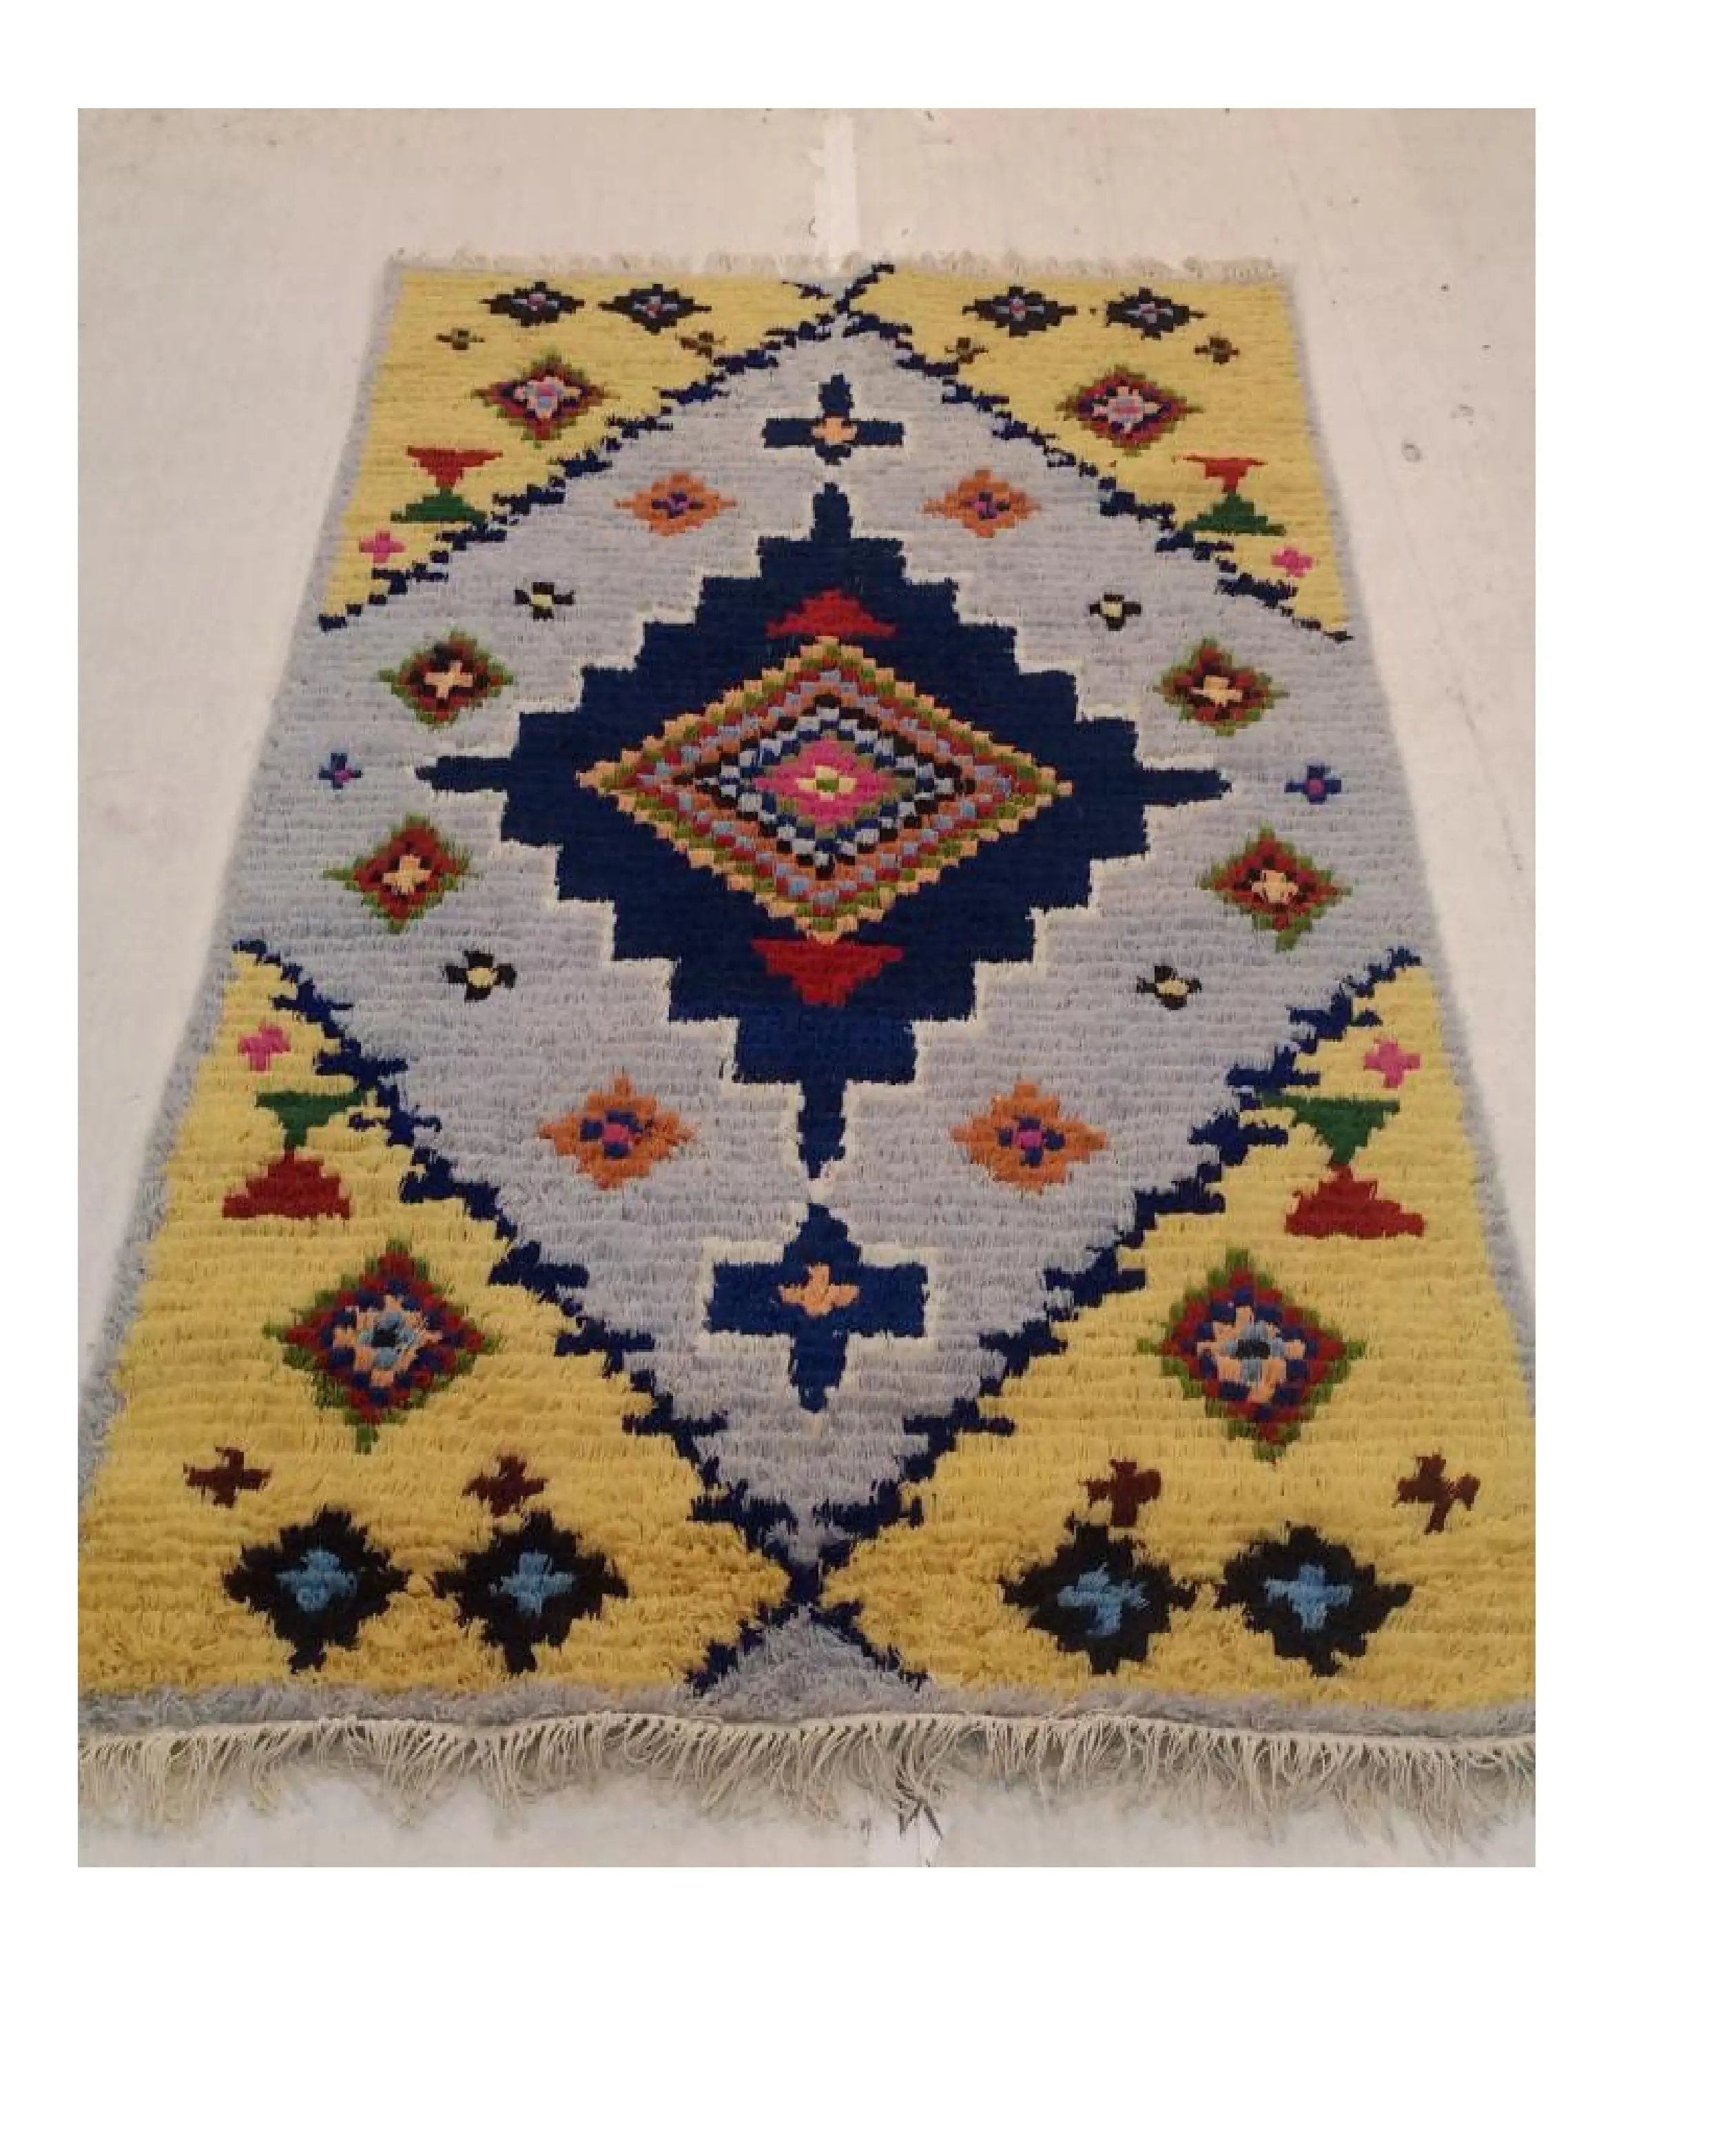 100% Wool Indian Vintage Authentic Moroccan Hand Woven Bohemian Home Decor Soft Tufted Hand Knotted Floor Area Rug Carpet